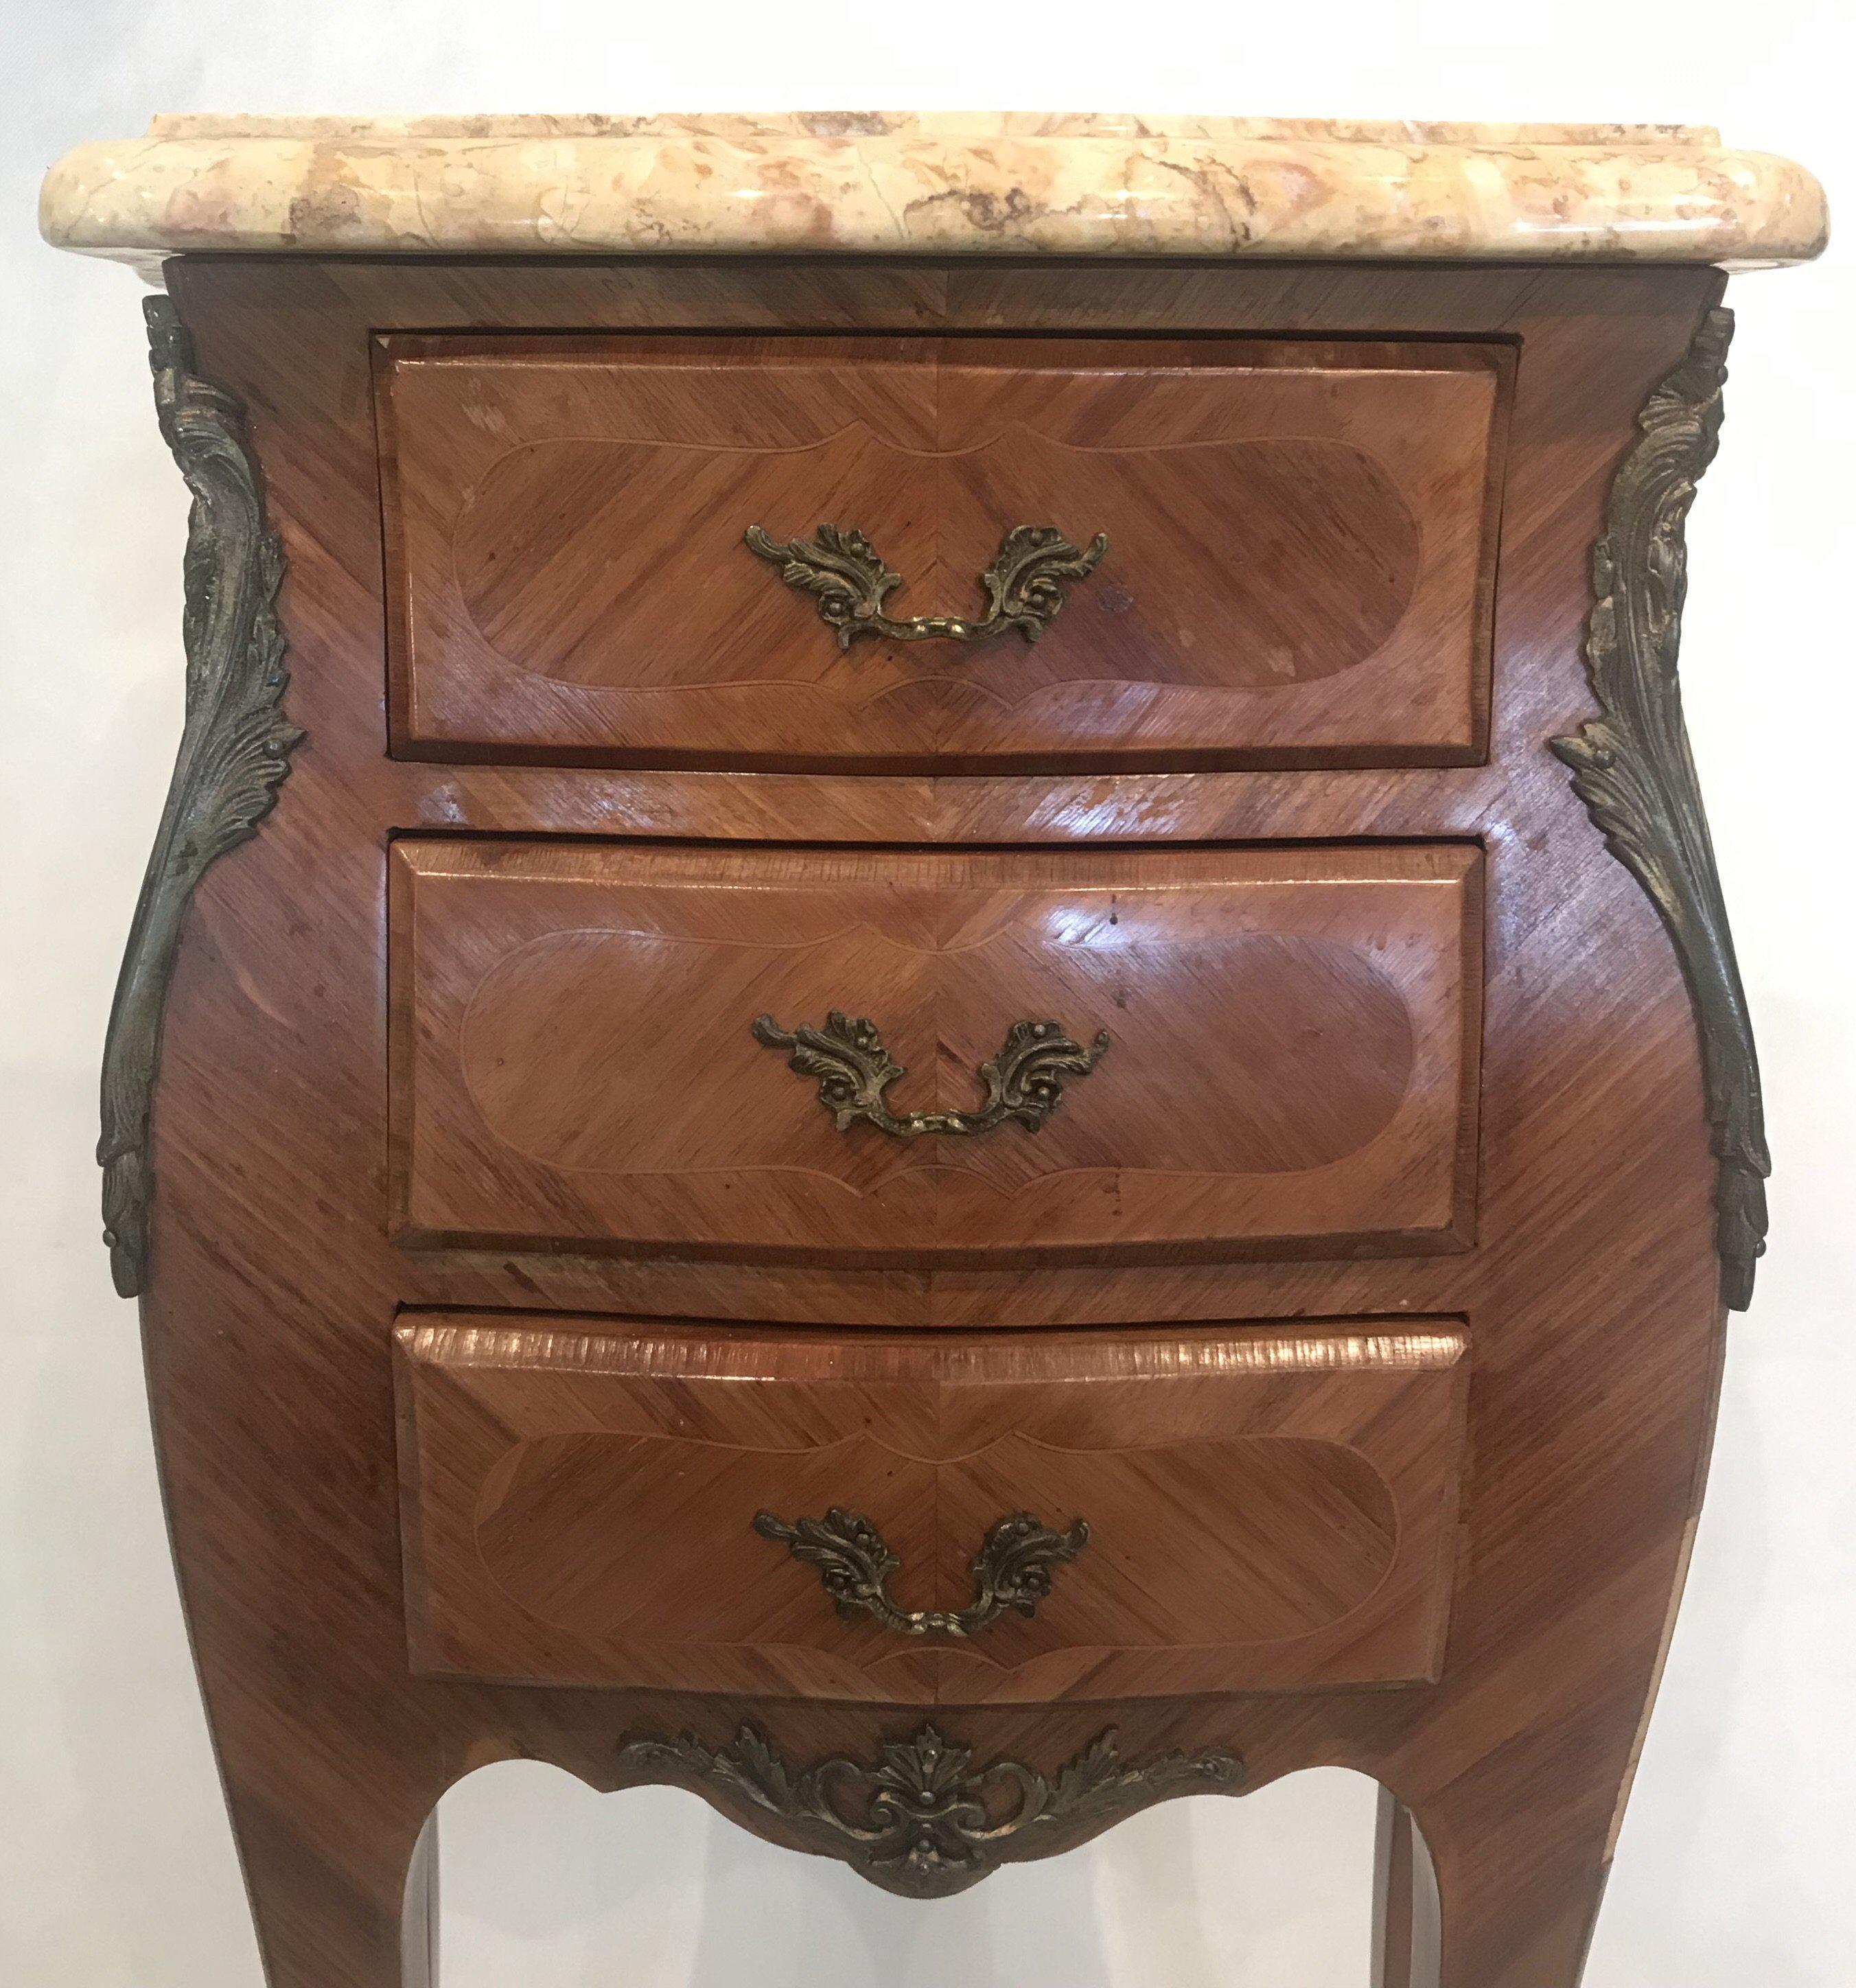 Pair of French Louis XV style beige marble top night stands having beautifully shaped marble top with molded edge, over case with herringbone inlay, gilt metal mounts, three drawers, and elegant legs with French bracket feet. Some minor veneer